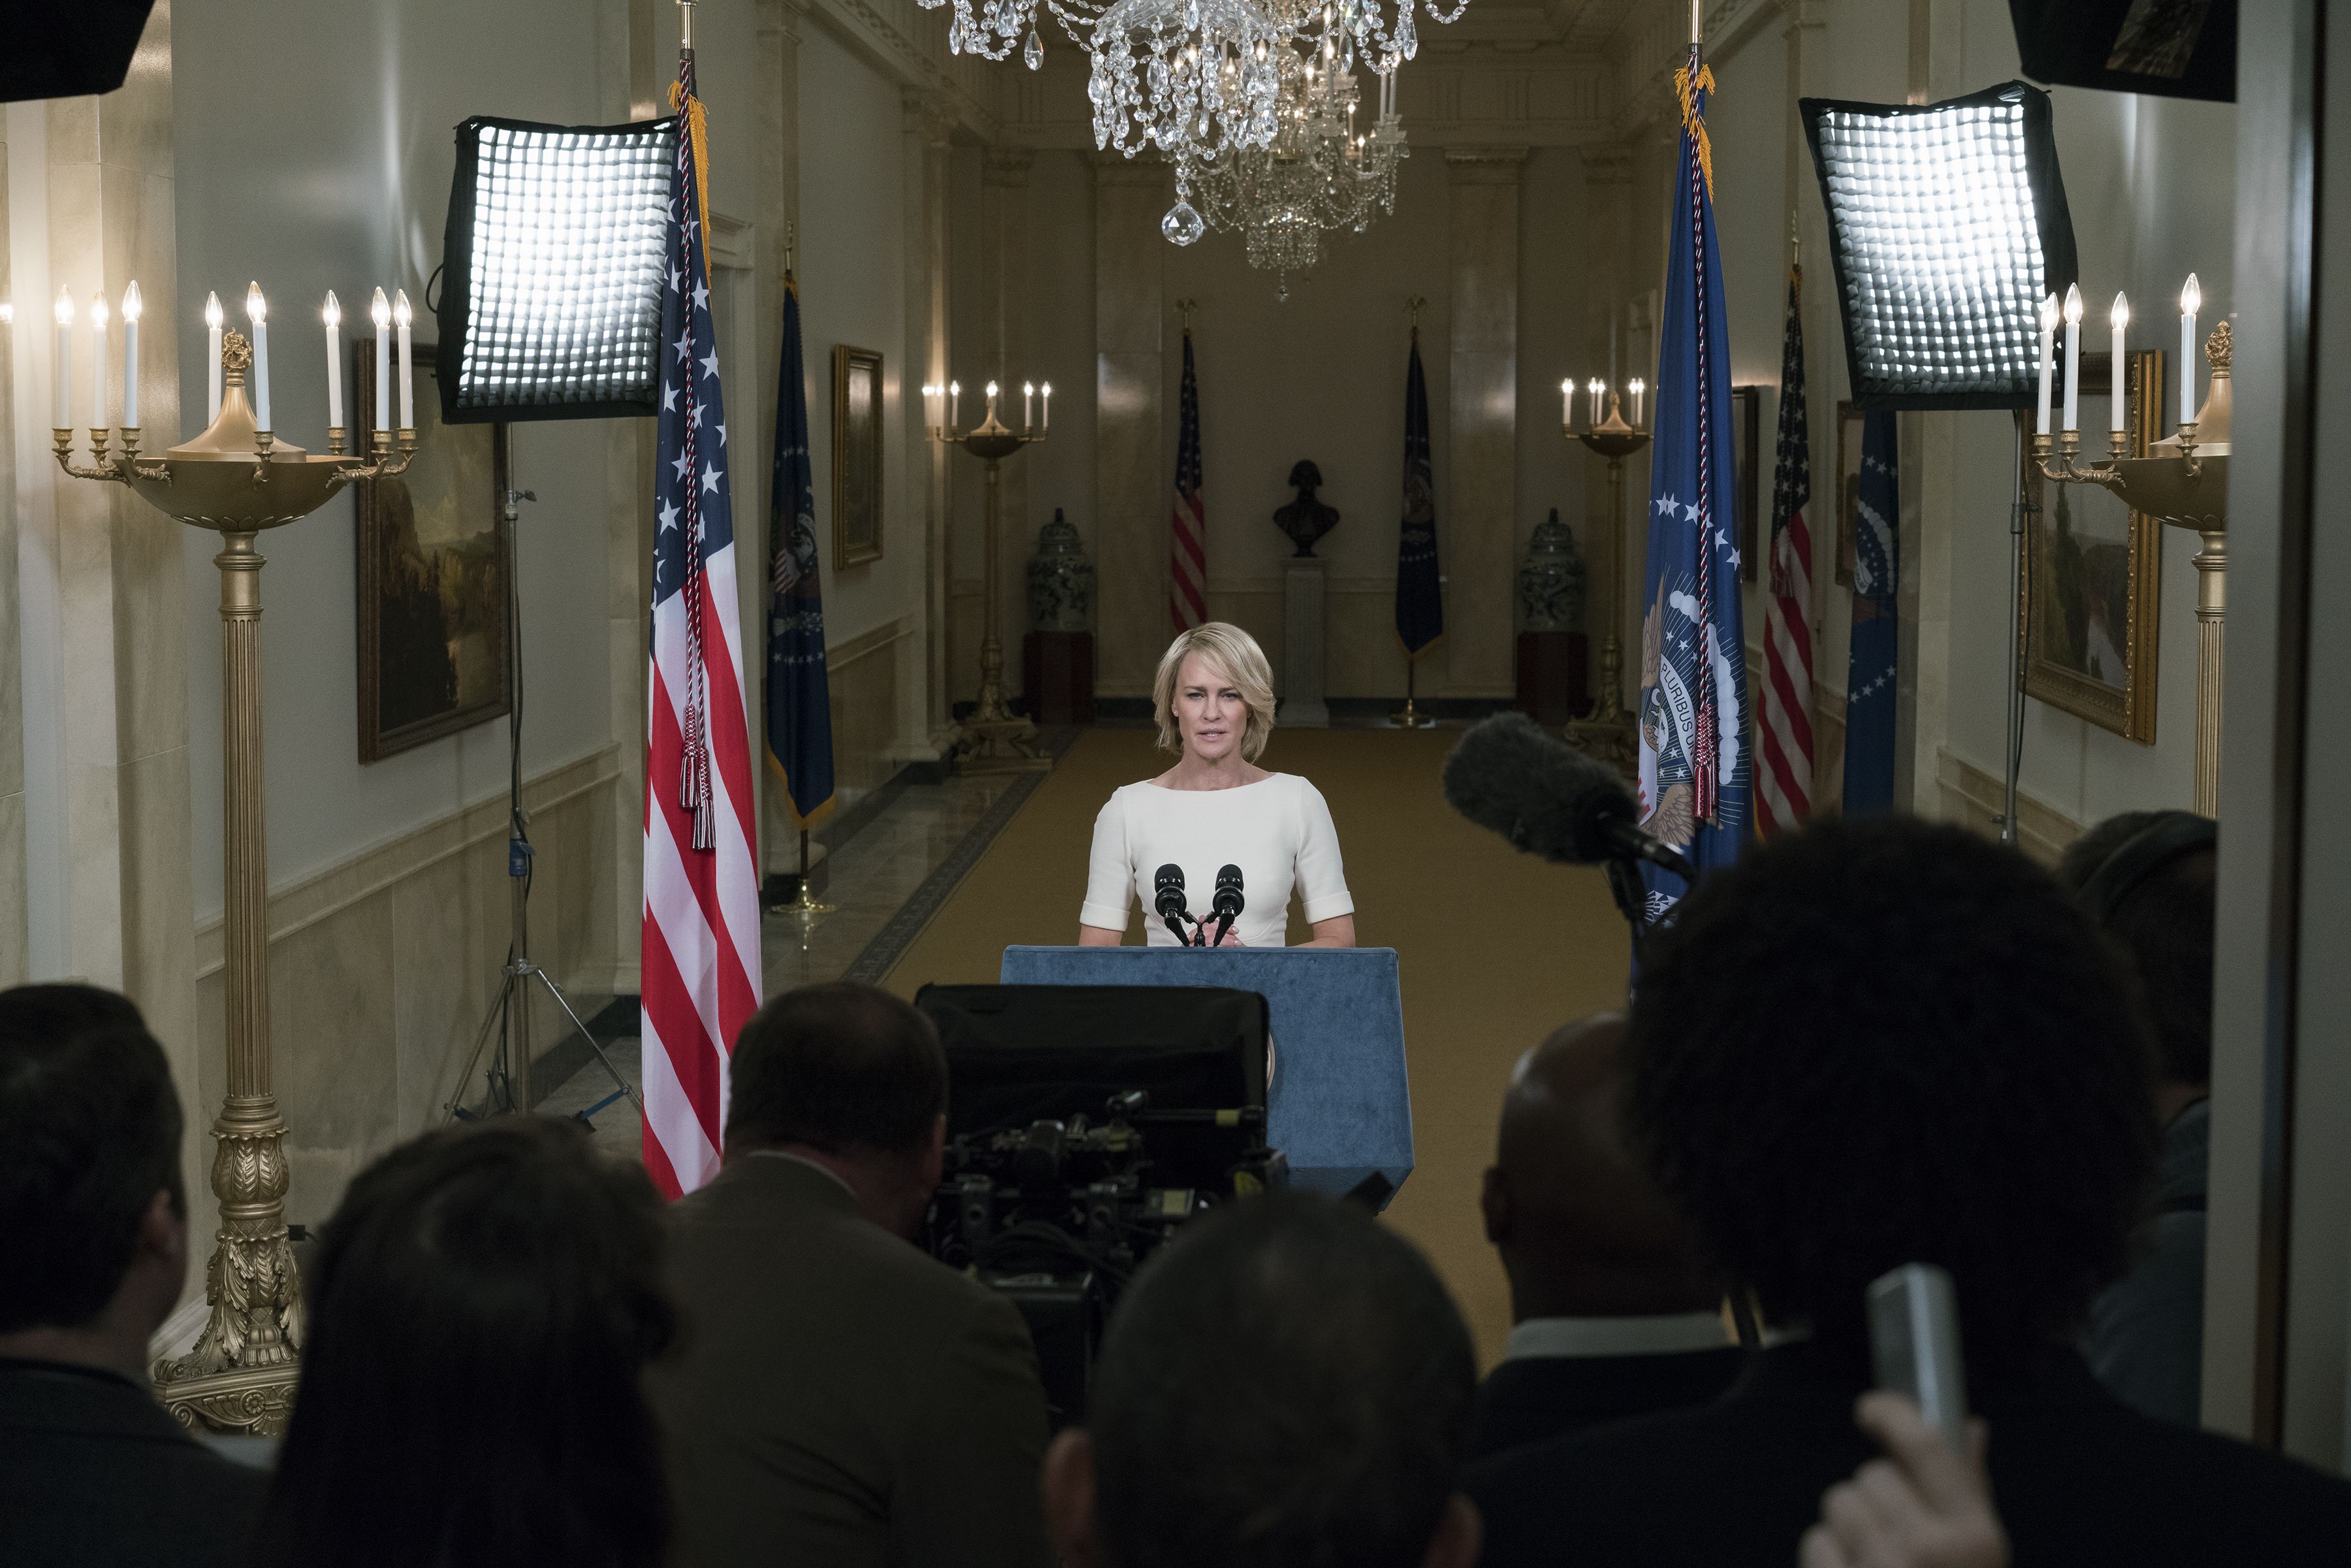 house of cards season 4 date